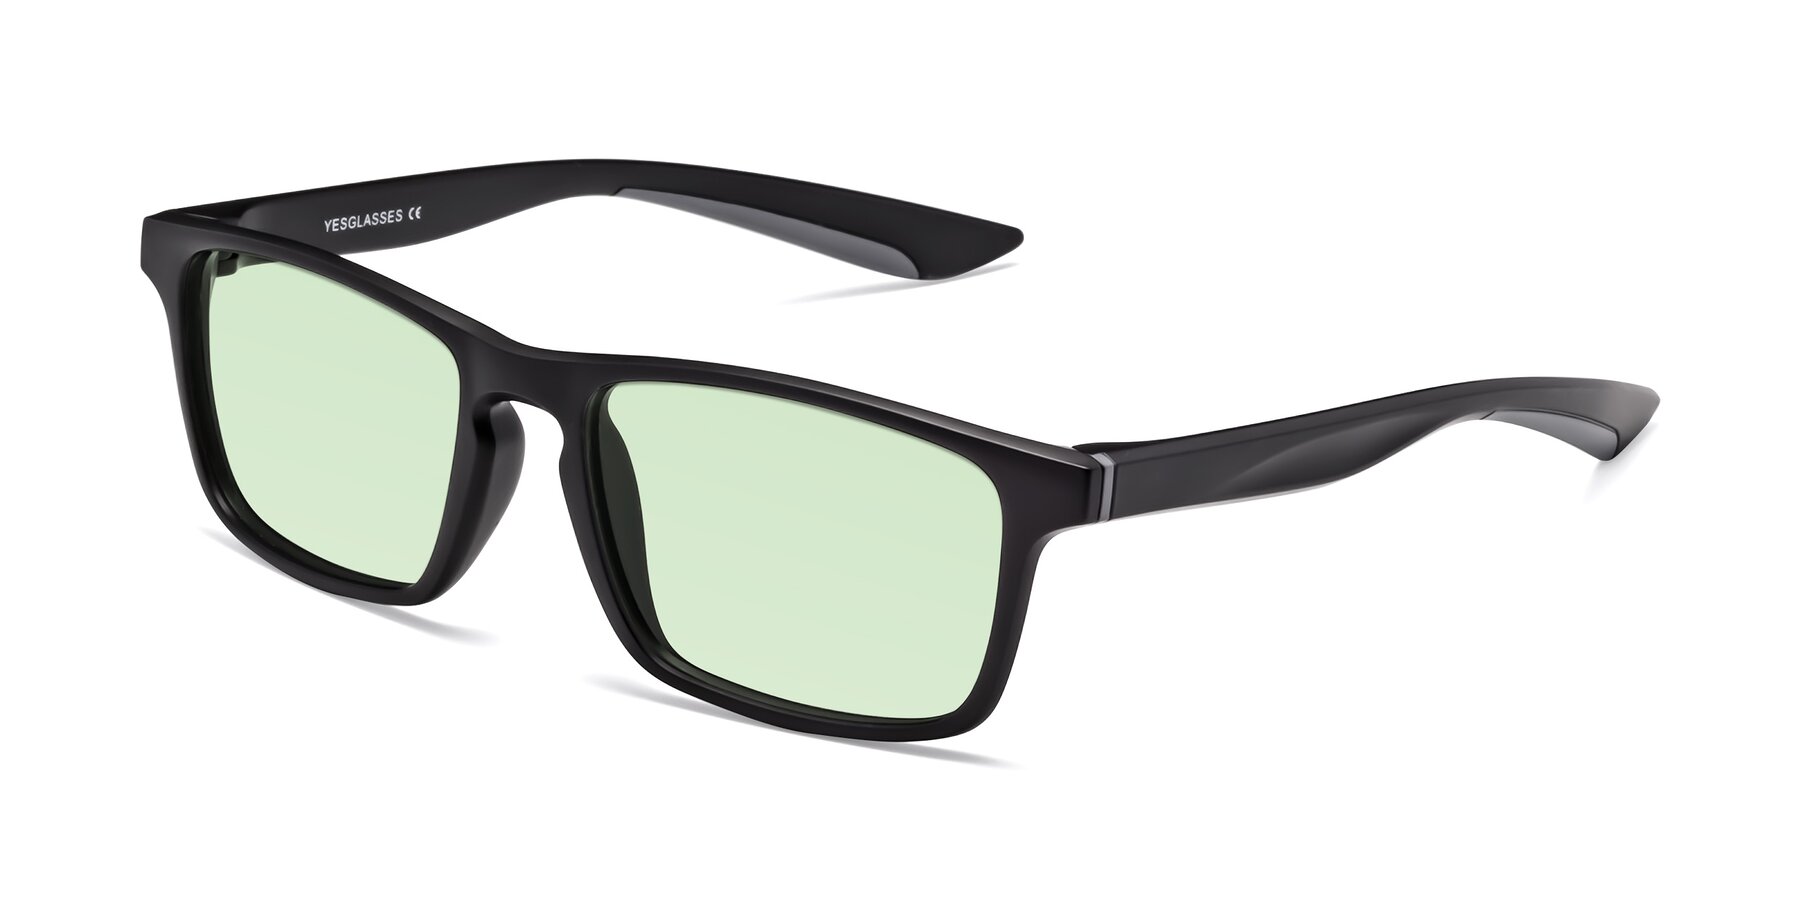 Angle of Passion in Matte Black-Gray with Light Green Tinted Lenses